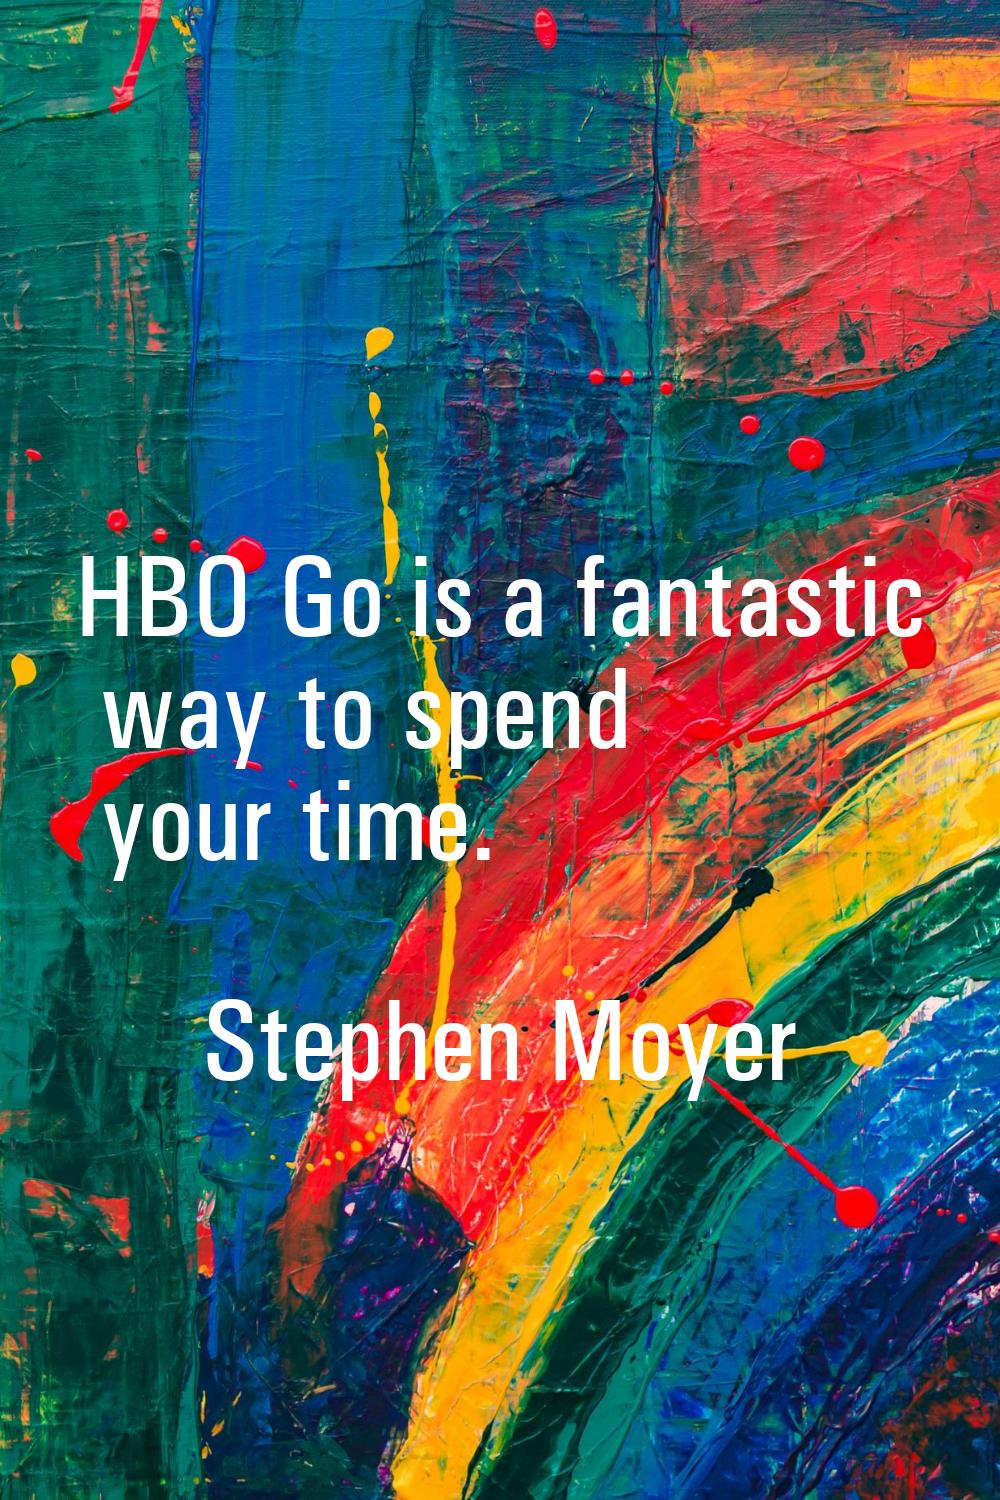 HBO Go is a fantastic way to spend your time.